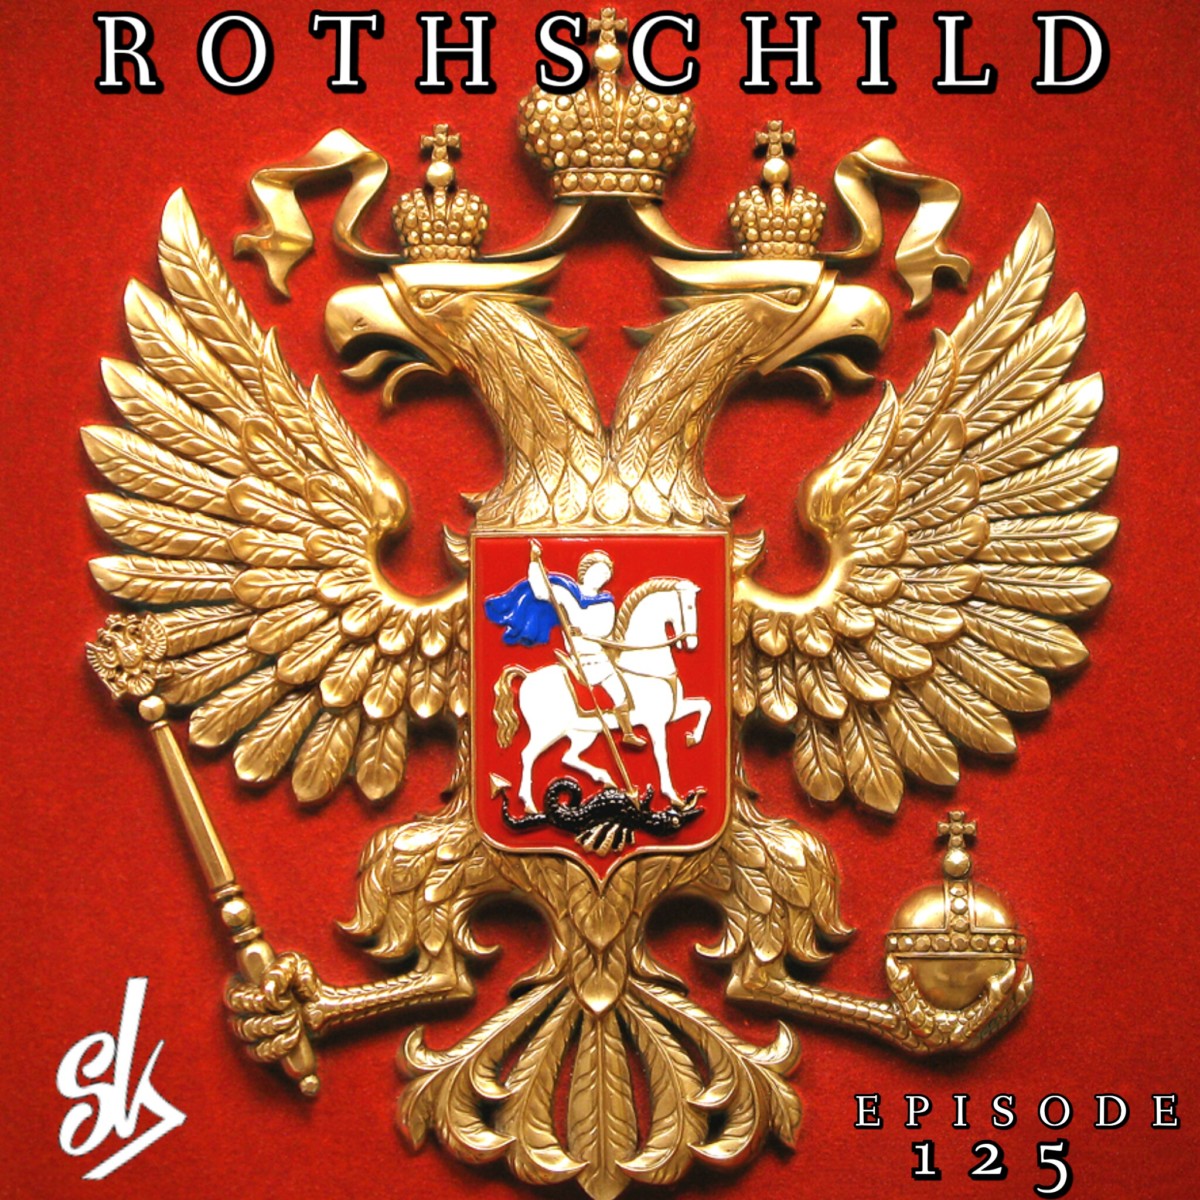 The Rothschild family might be the most powerful that has ever eisted. (Photo internet reproduction)